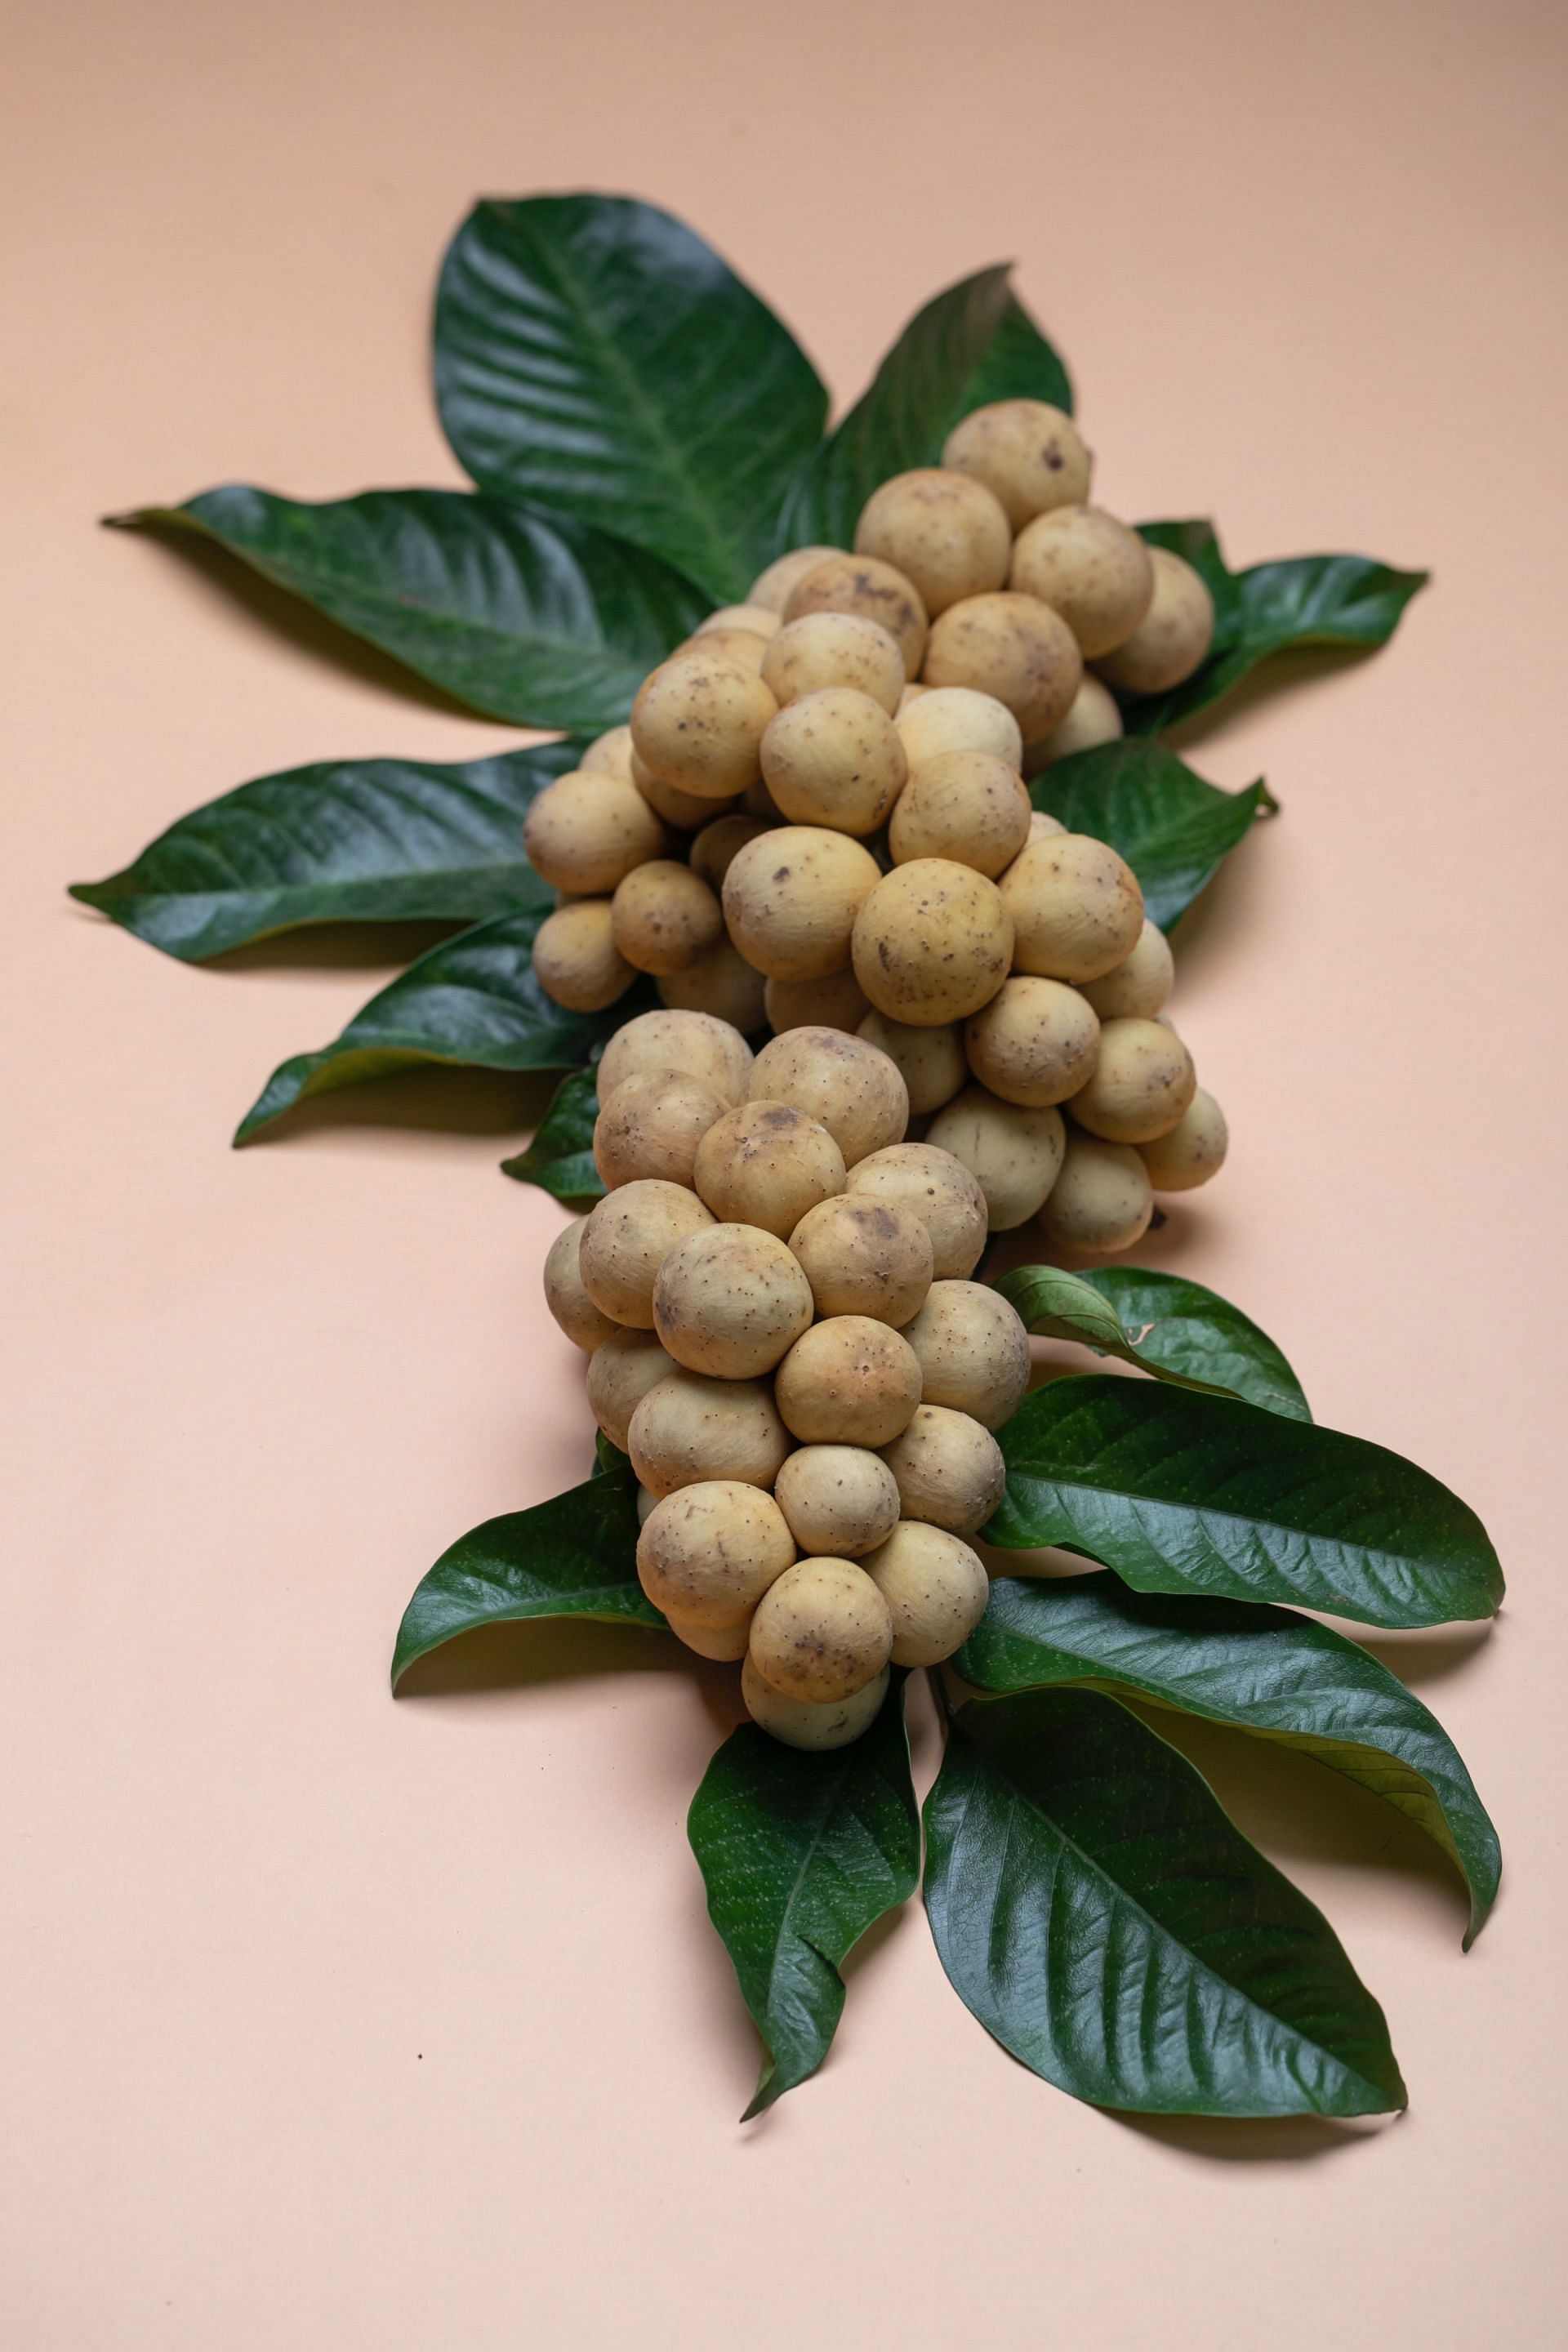 Longan fruit is especially high in vitamin C and flavonoids. (Image via Pexels)